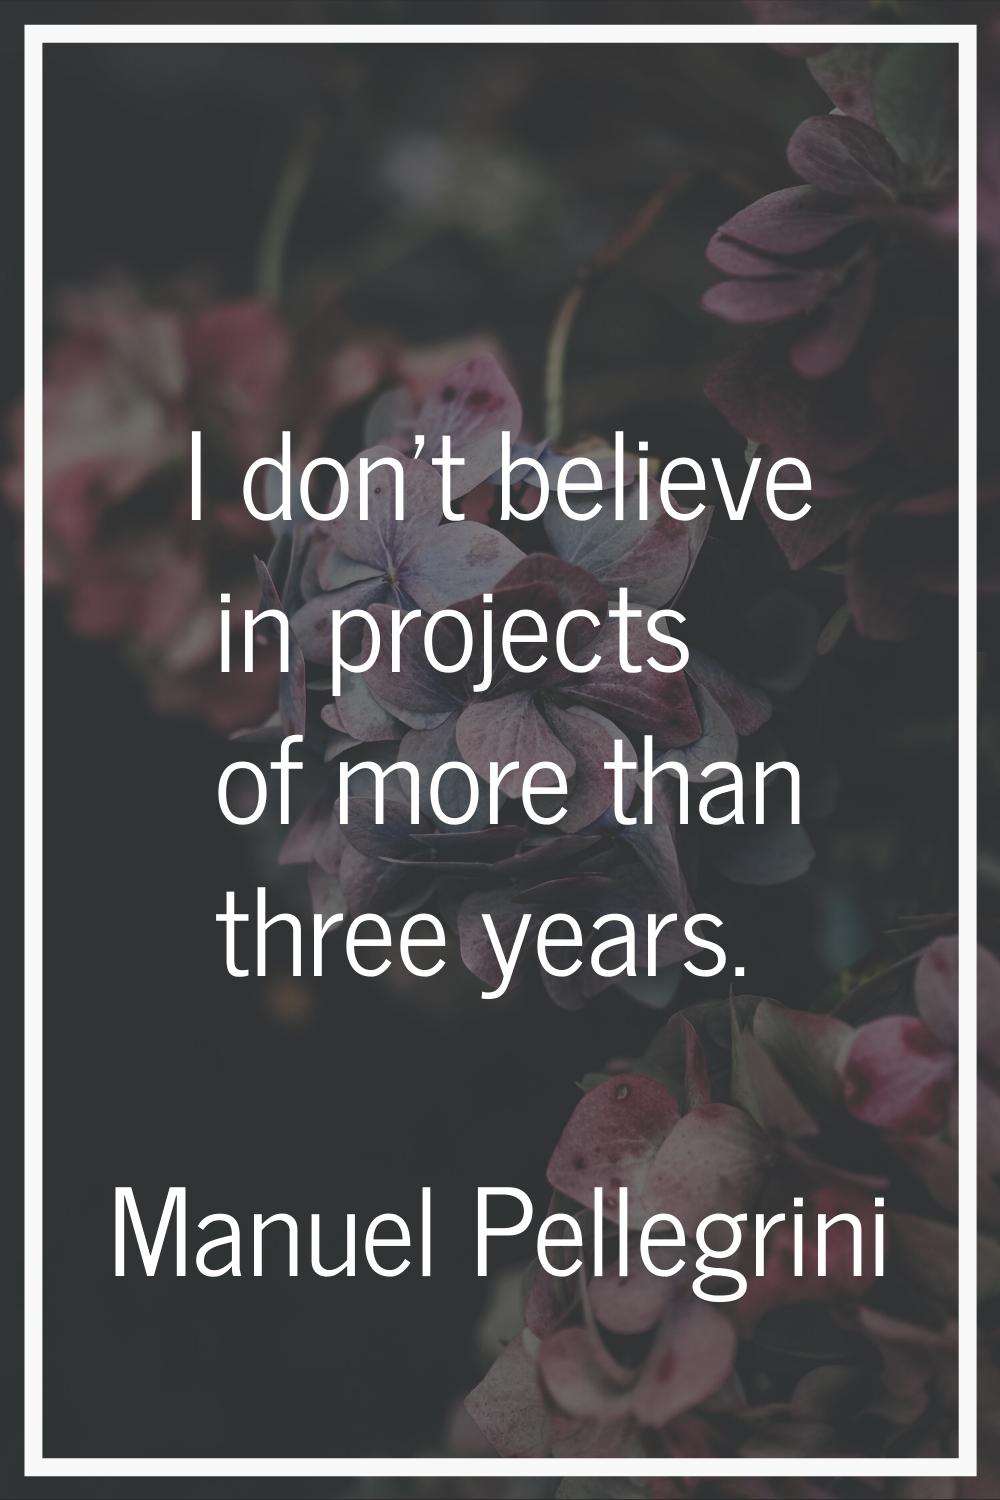 I don't believe in projects of more than three years.